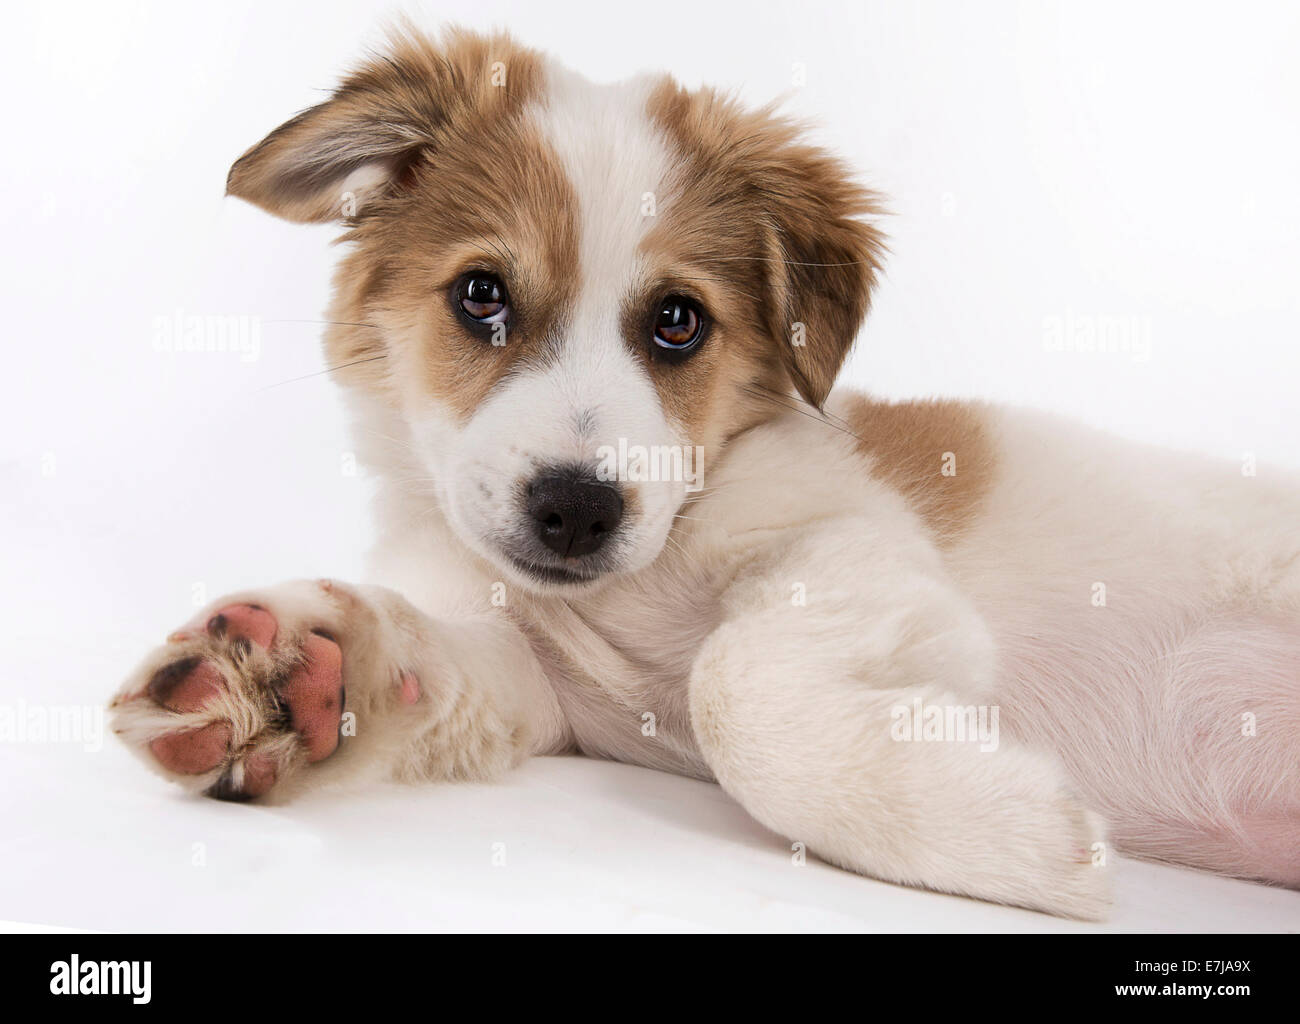 Jack Russell Terrier mix, Puppy Stock Photo